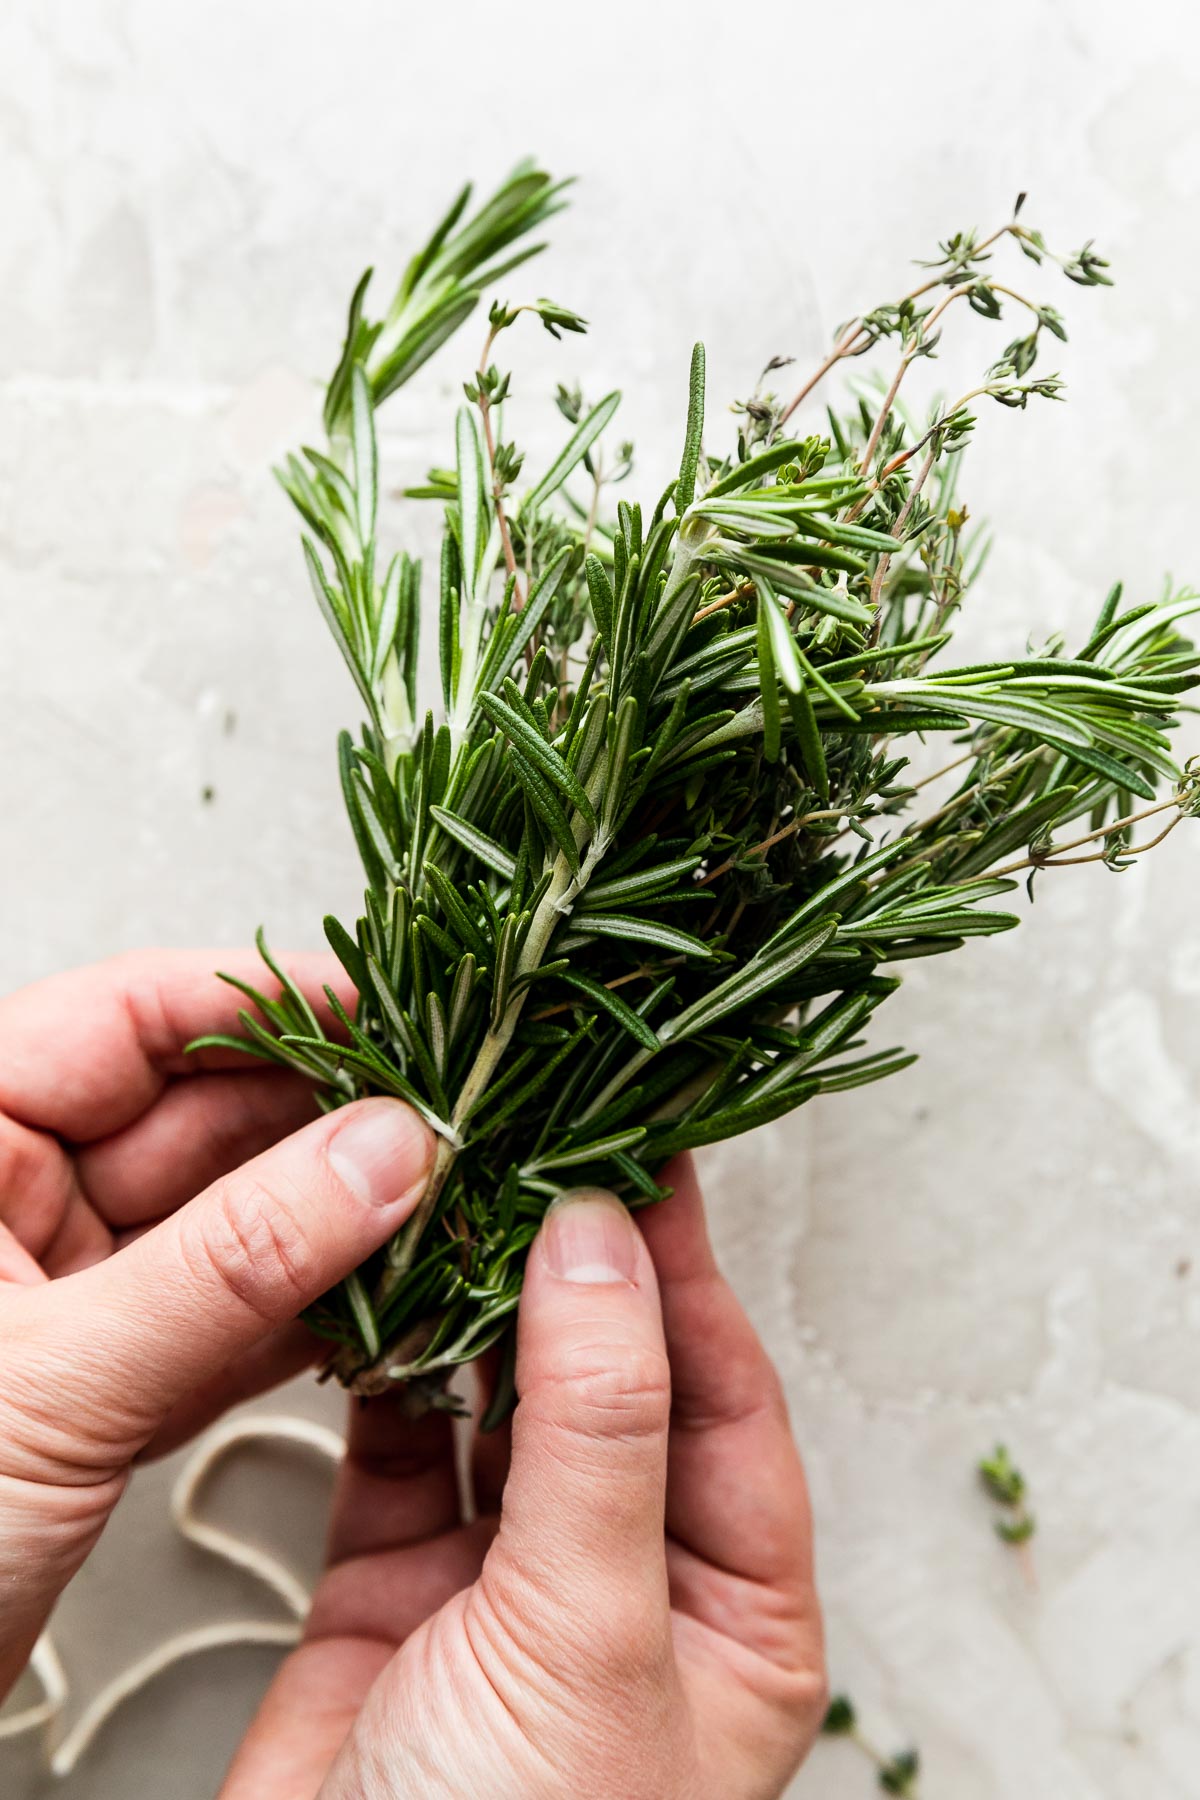 A woman's hands gather a large bunch of loose fresh rosemary and fresh thyme sprigs so that the ends of the sprigs are aligned. Her hands hold the gathered bunch of herbs above a creamy white textured surface. A single piece of kitchen twine rests on the surface below.